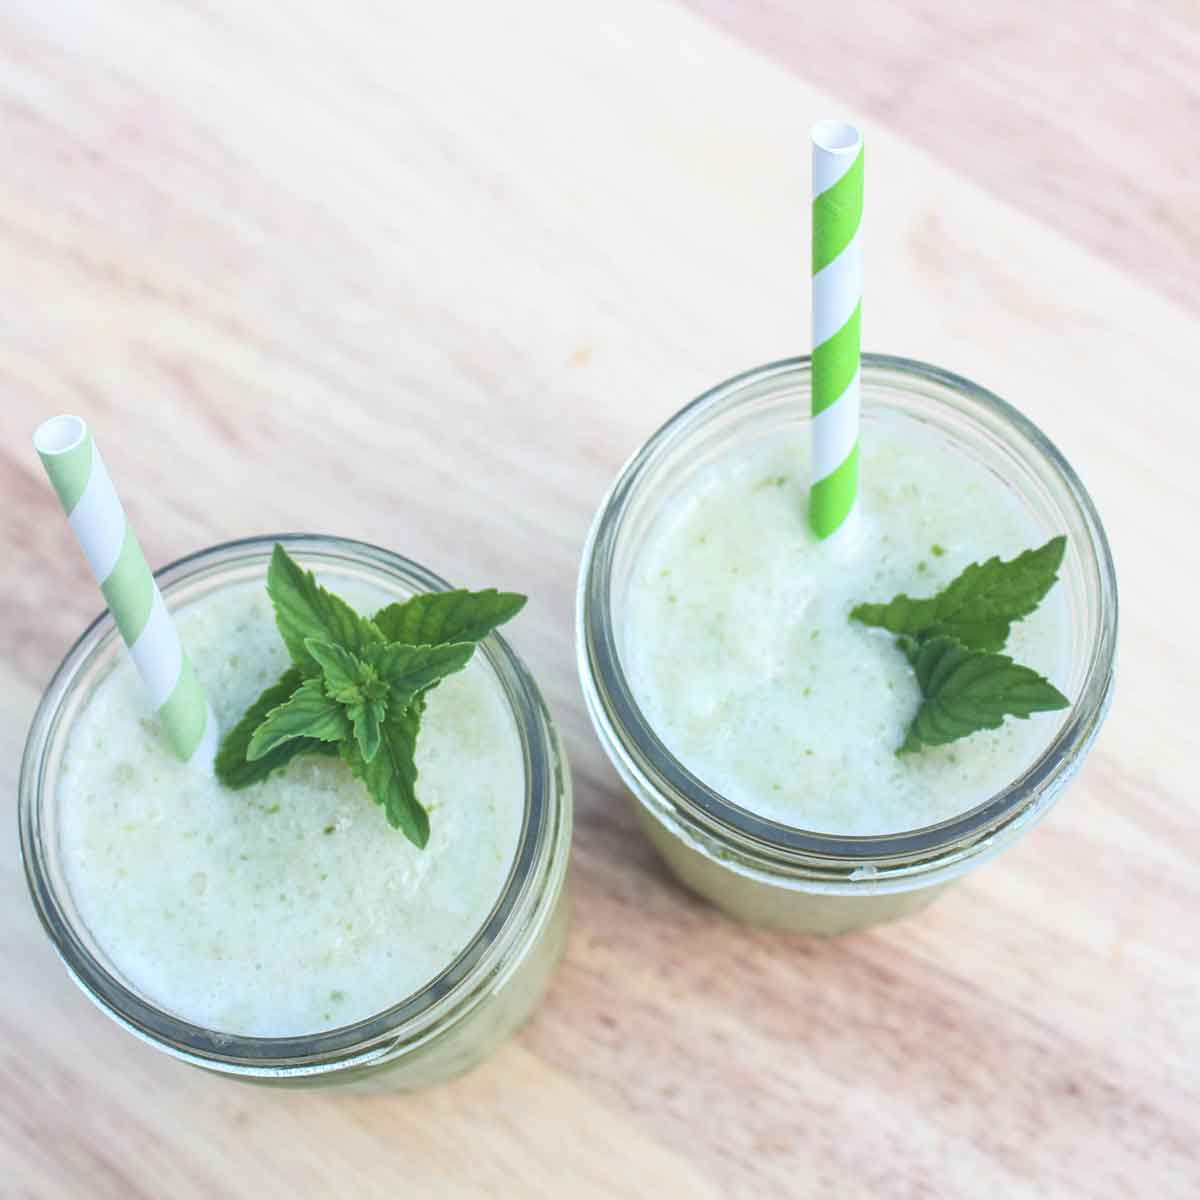 Sweet Basil and Cucumber Melon Smoothies